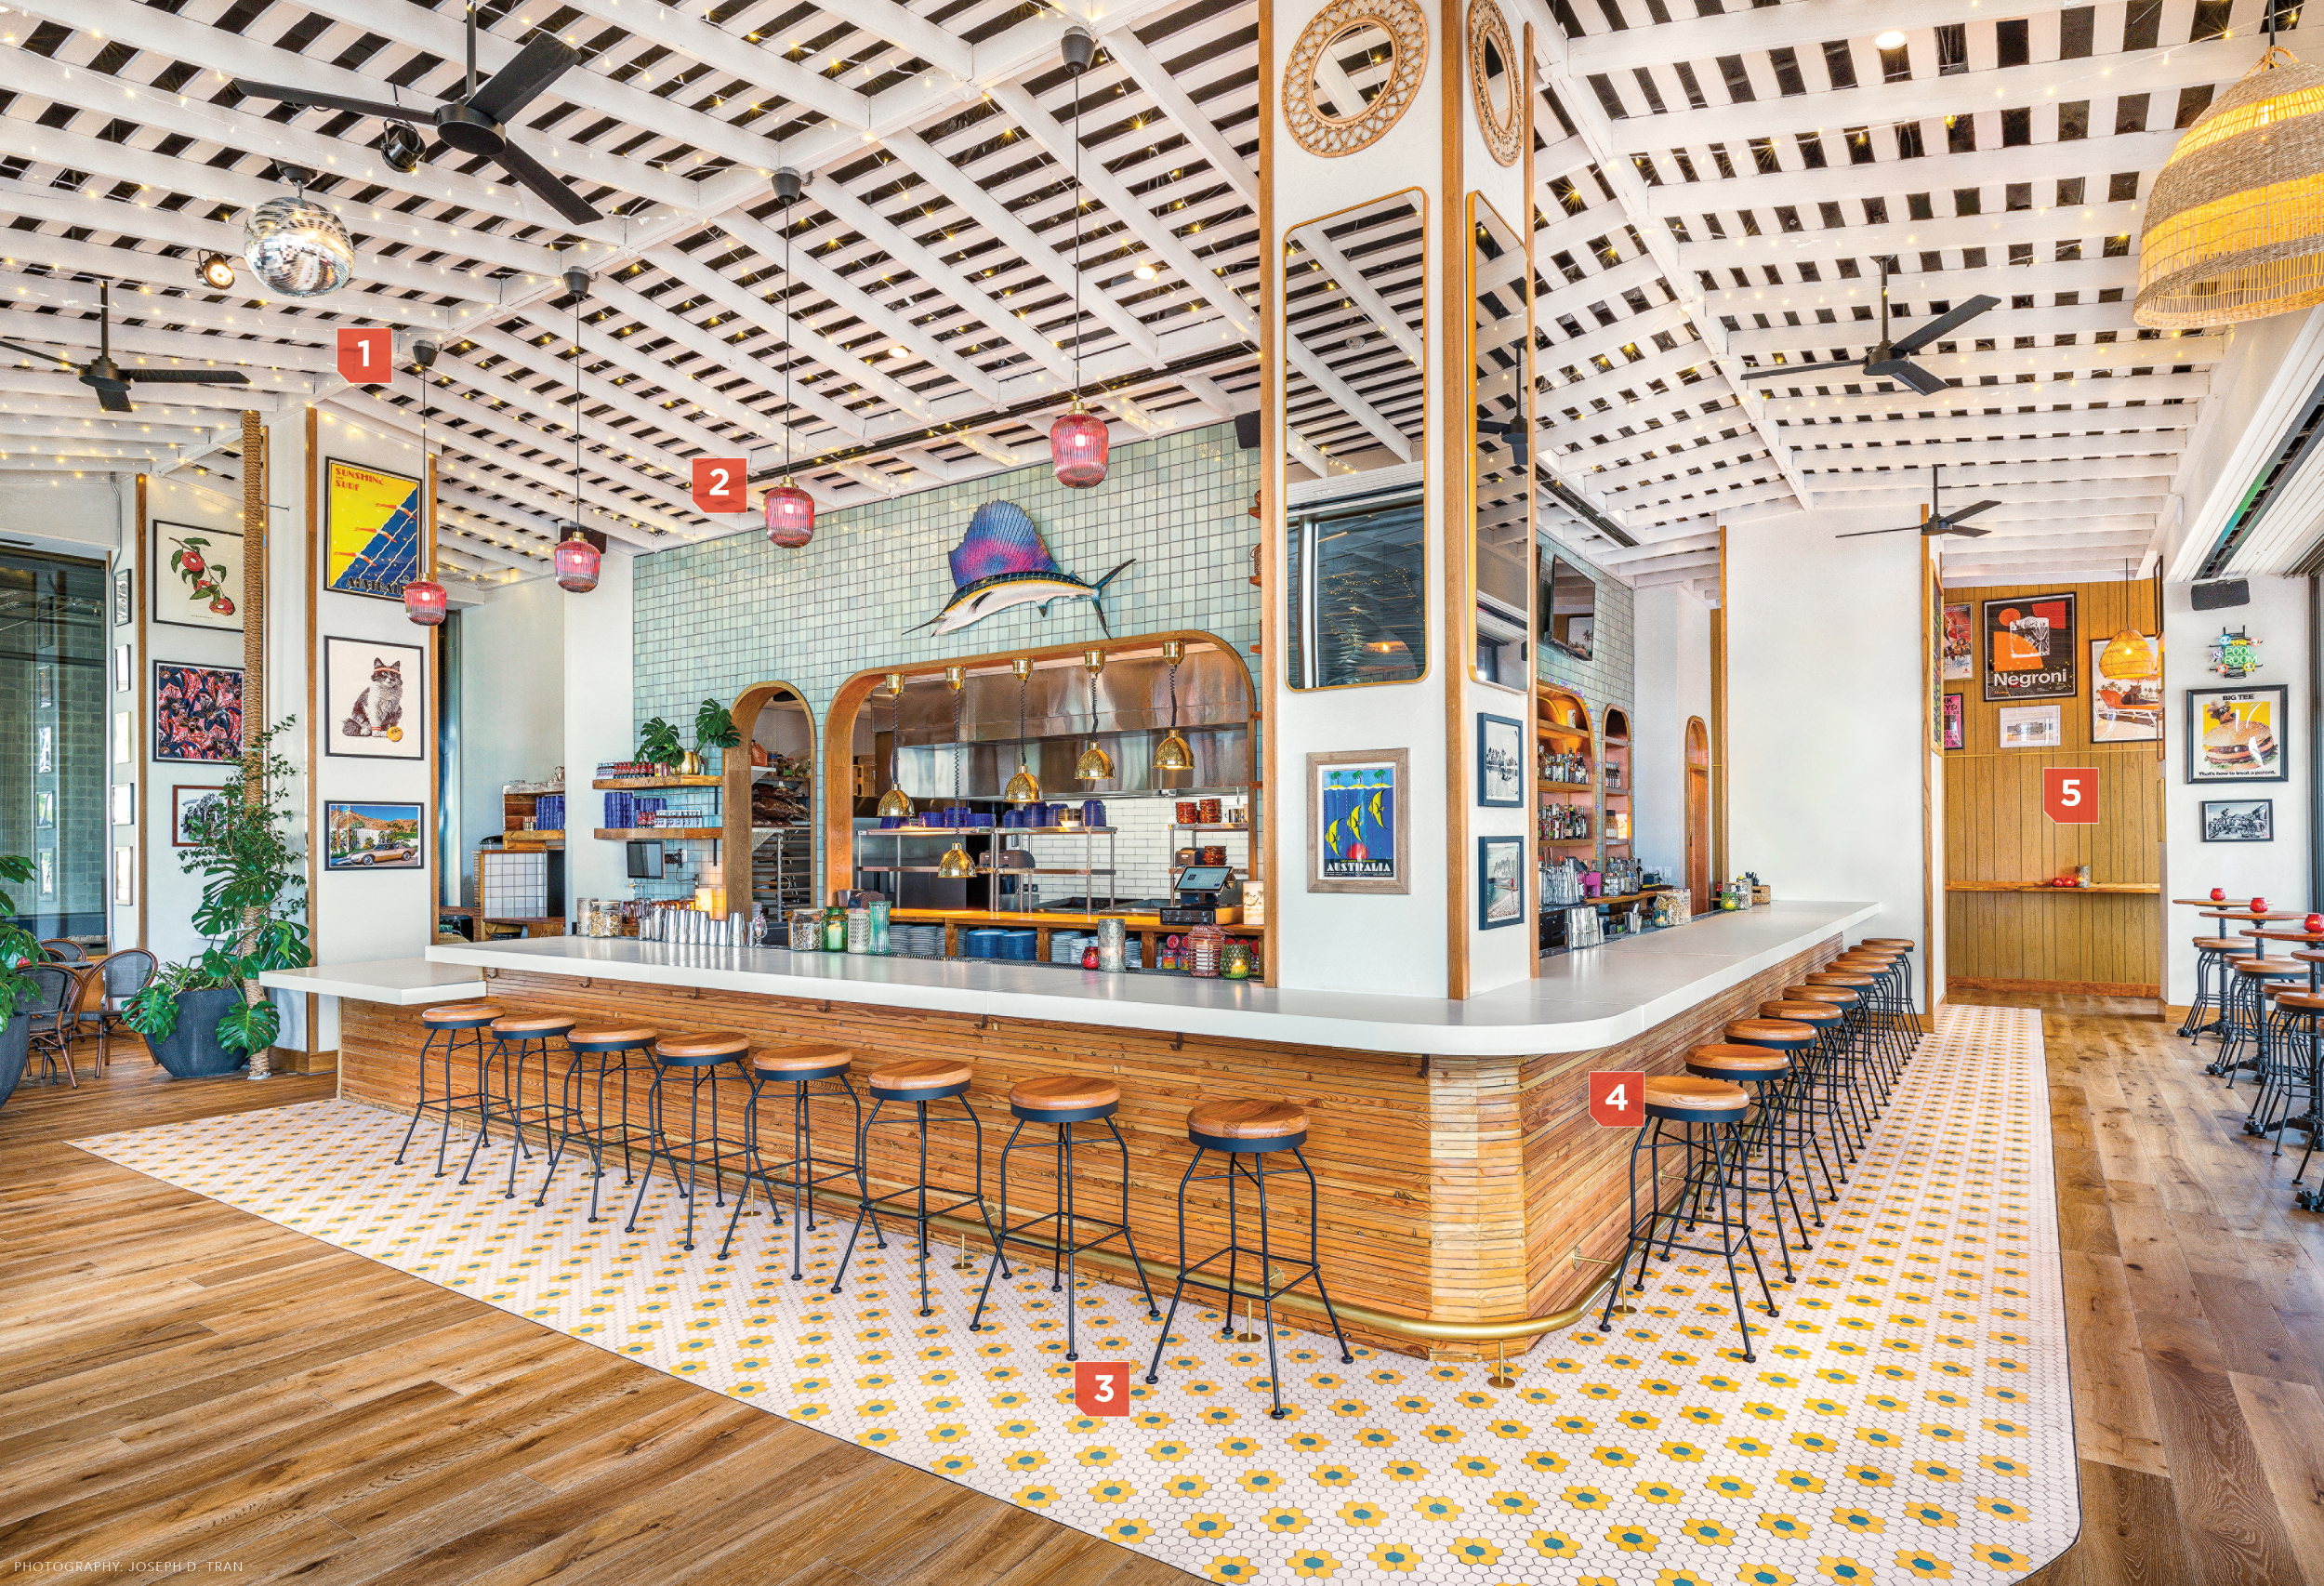 At Lucky Buns, Framed Prints and Wall Decor Create a Kitschy and Laid-Back Atmosphere